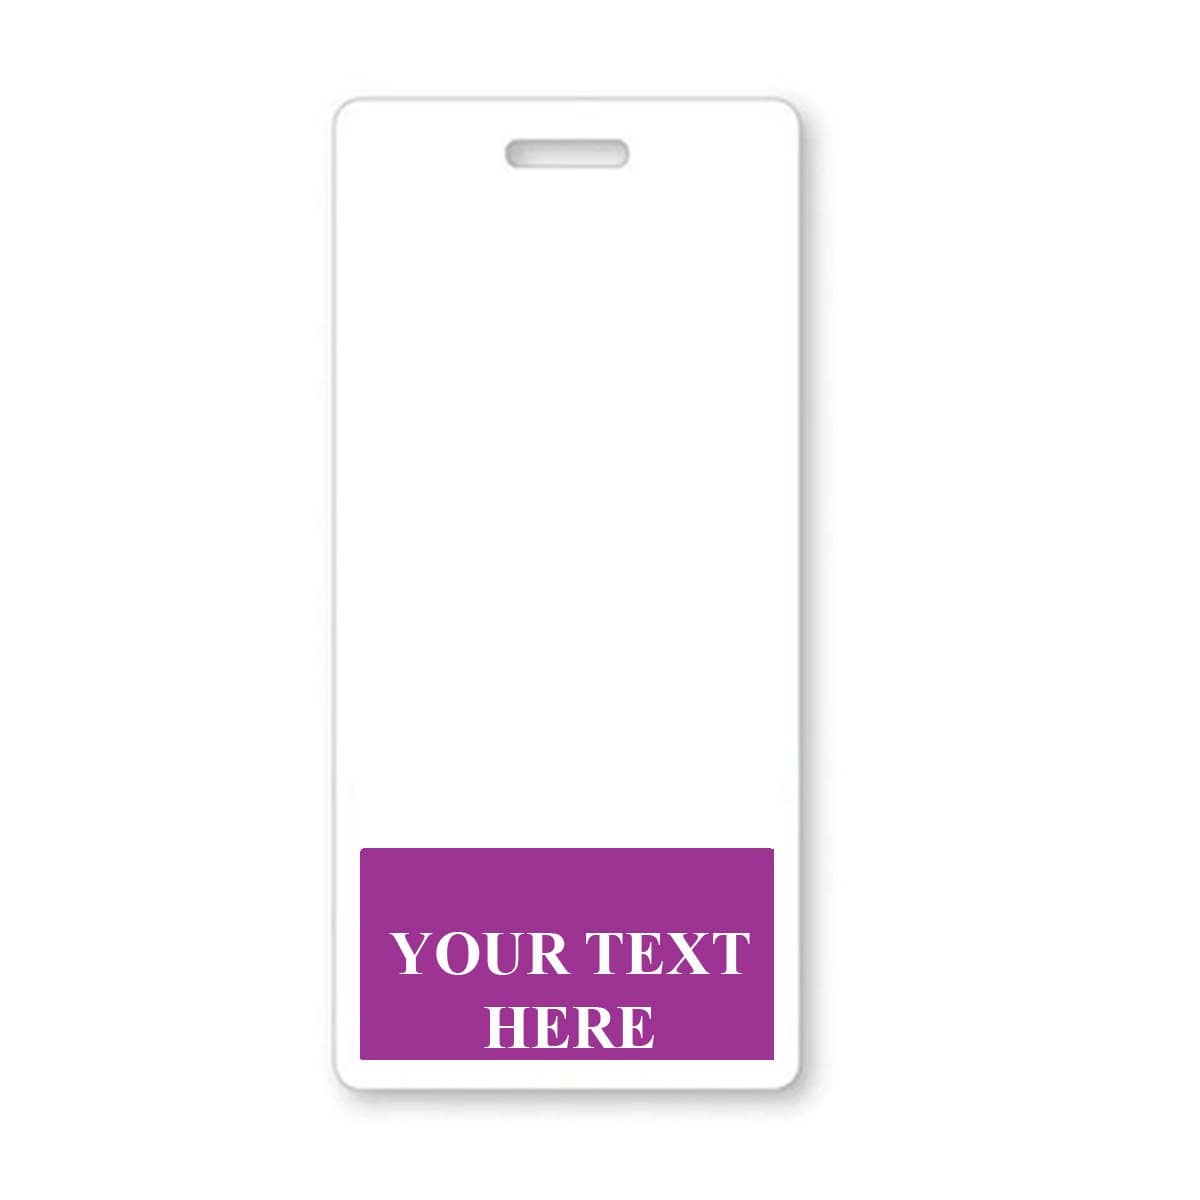 A Custom Printed Badge Buddy Vertical (Standard Size) with a purple section at the bottom containing the text "YOUR TEXT HERE" in white letters, perfect for creating custom badge buddies.